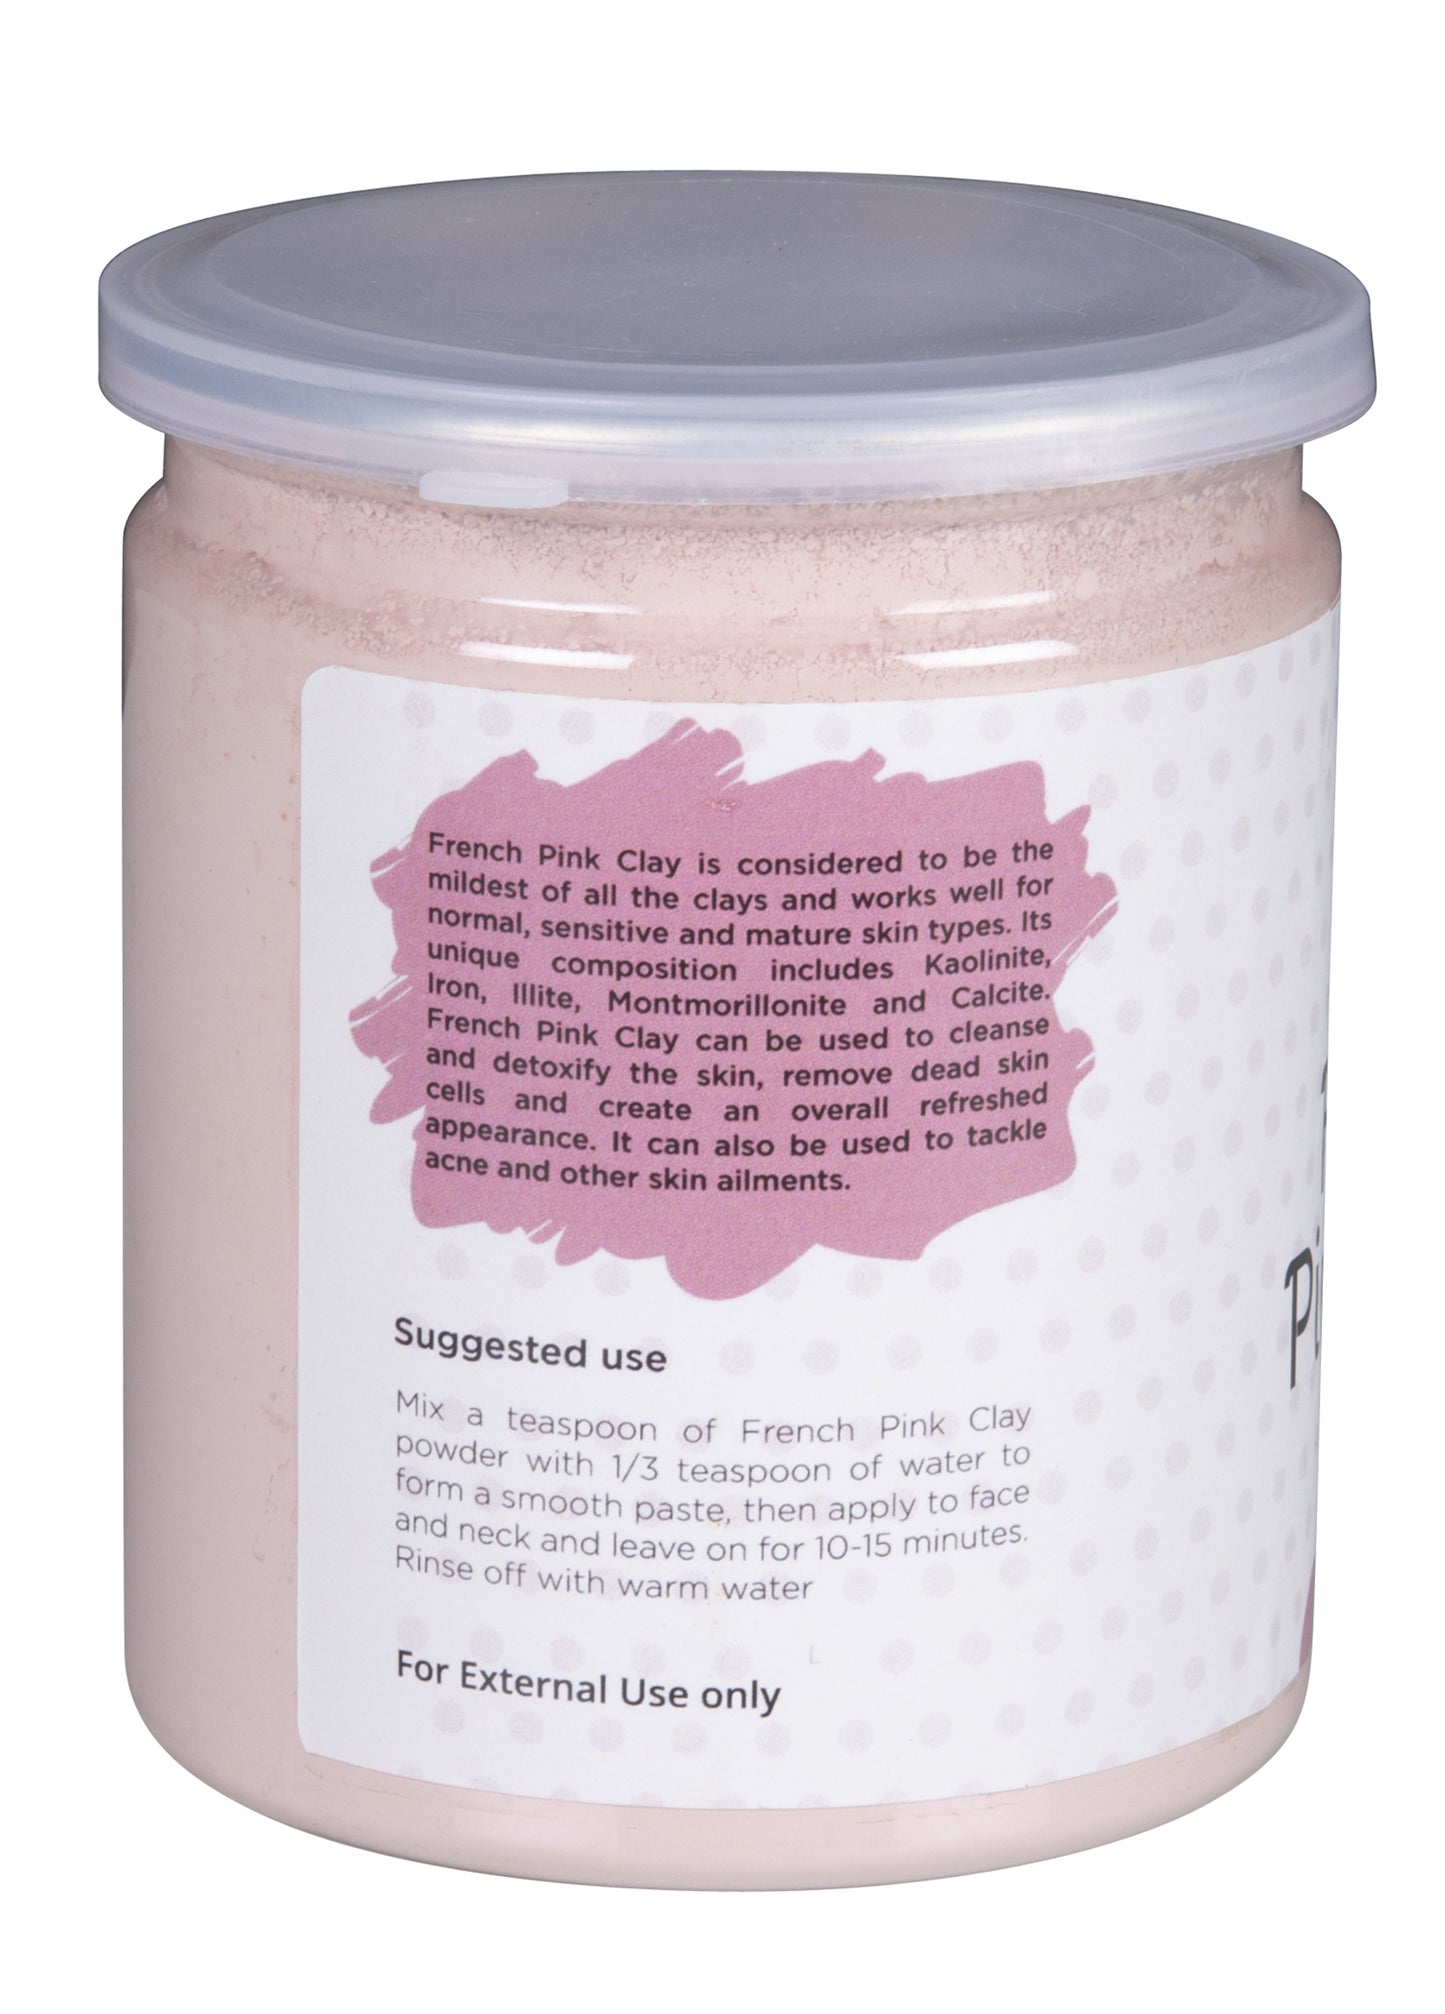 Pink Clay / Rose Clay Powder for Soap Making | 8 Oz | Fine, Gentle and Soothing Clay for Face Masks, Soaps and More | by Yogi's Gift ®